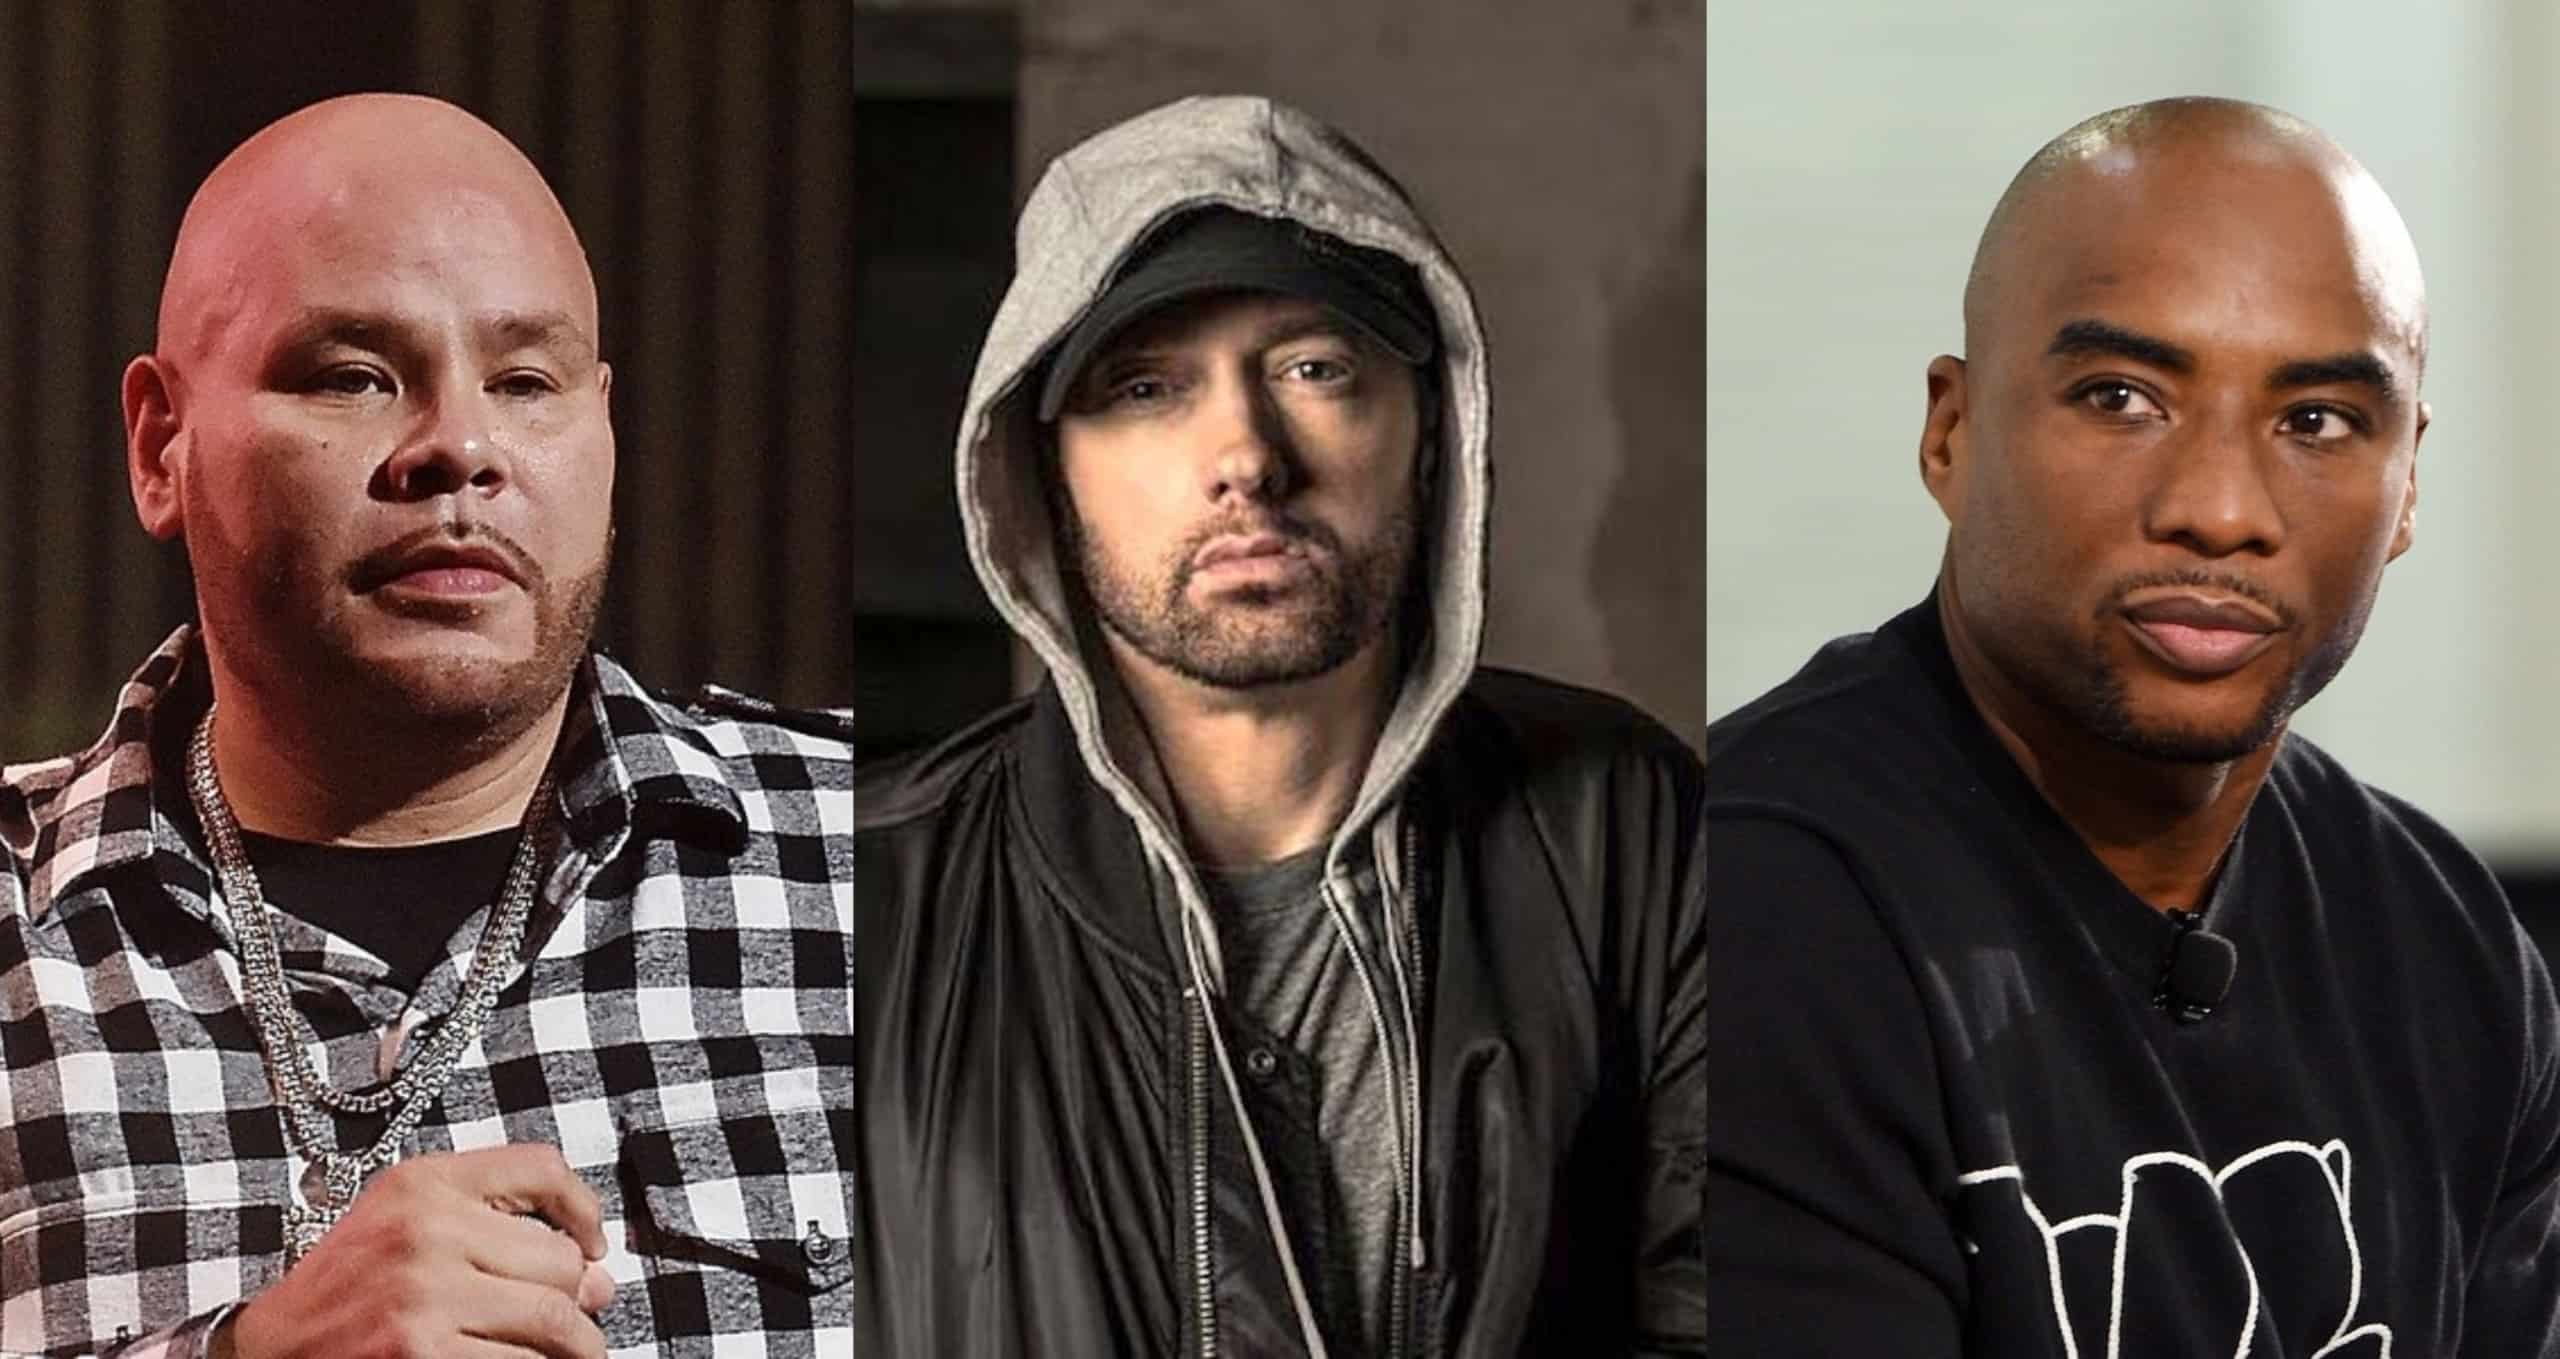 Charlamagne Tha God Tells Fat Joe That Eminem has No Club Bangers & No Songs to Go Against Other Rappers